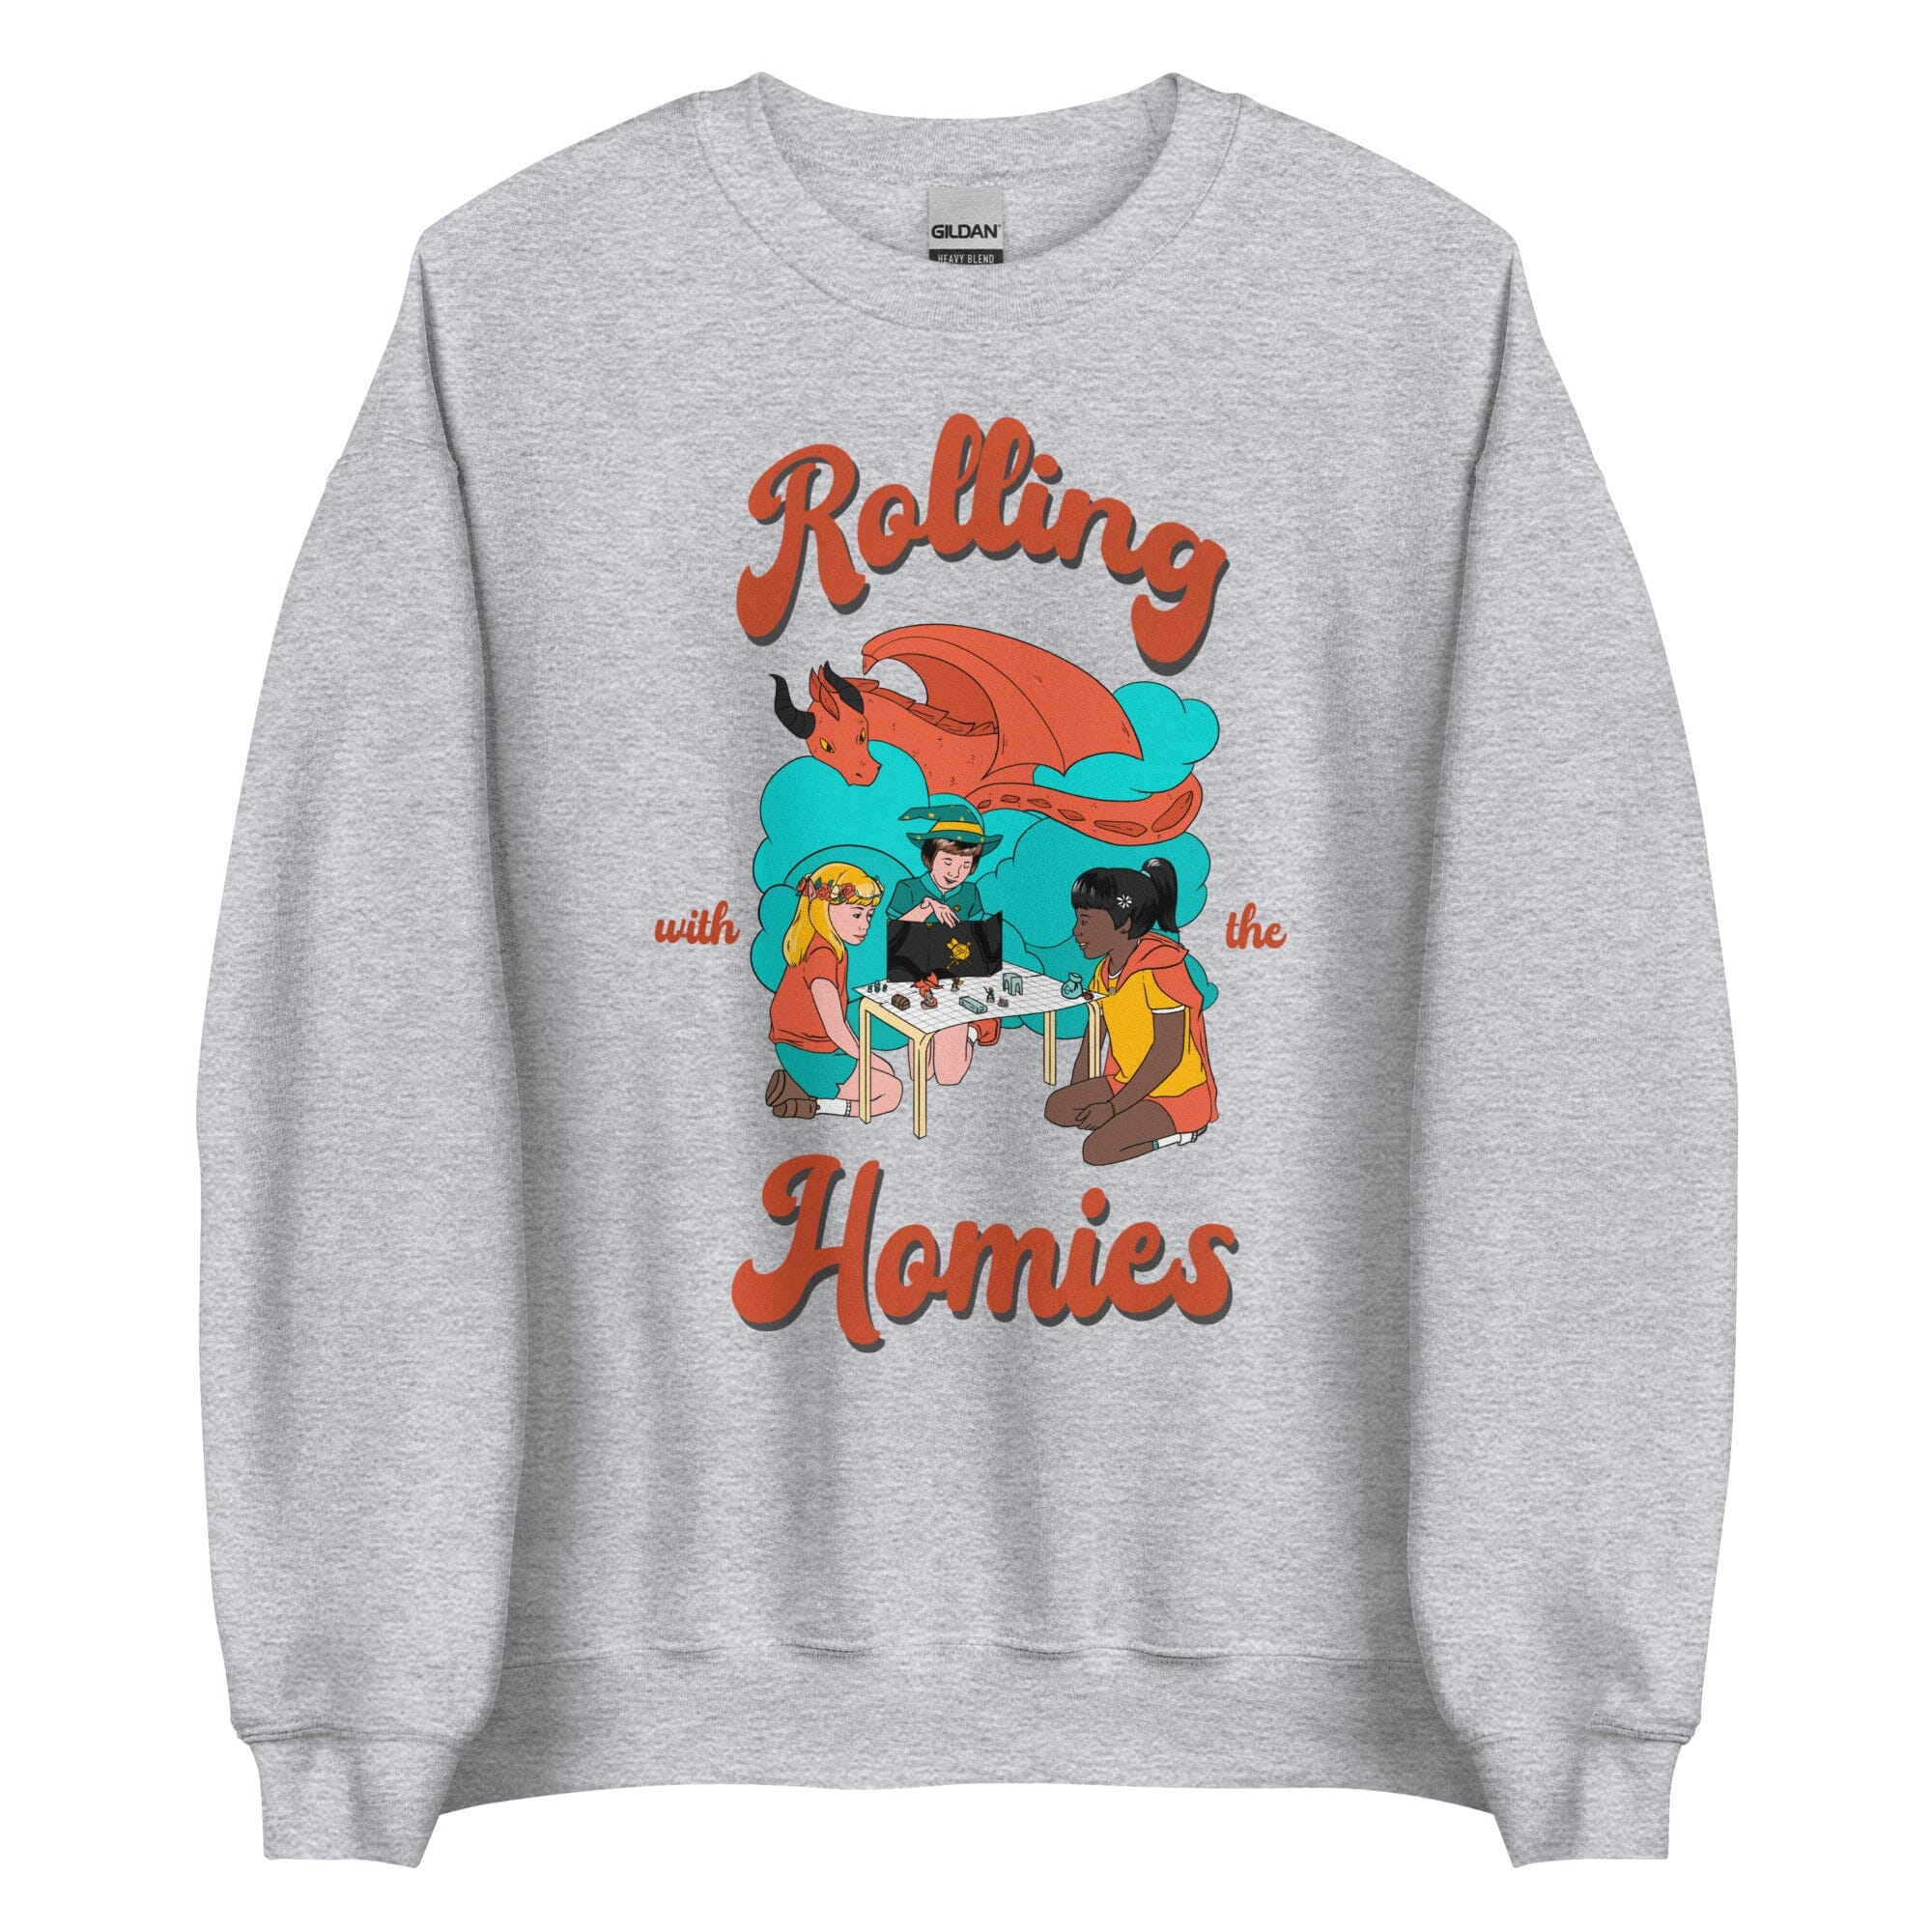 Rolling with the Homies | Unisex Sweatshirt | Retro Gaming Threads & Thistles Inventory Sport Grey S 